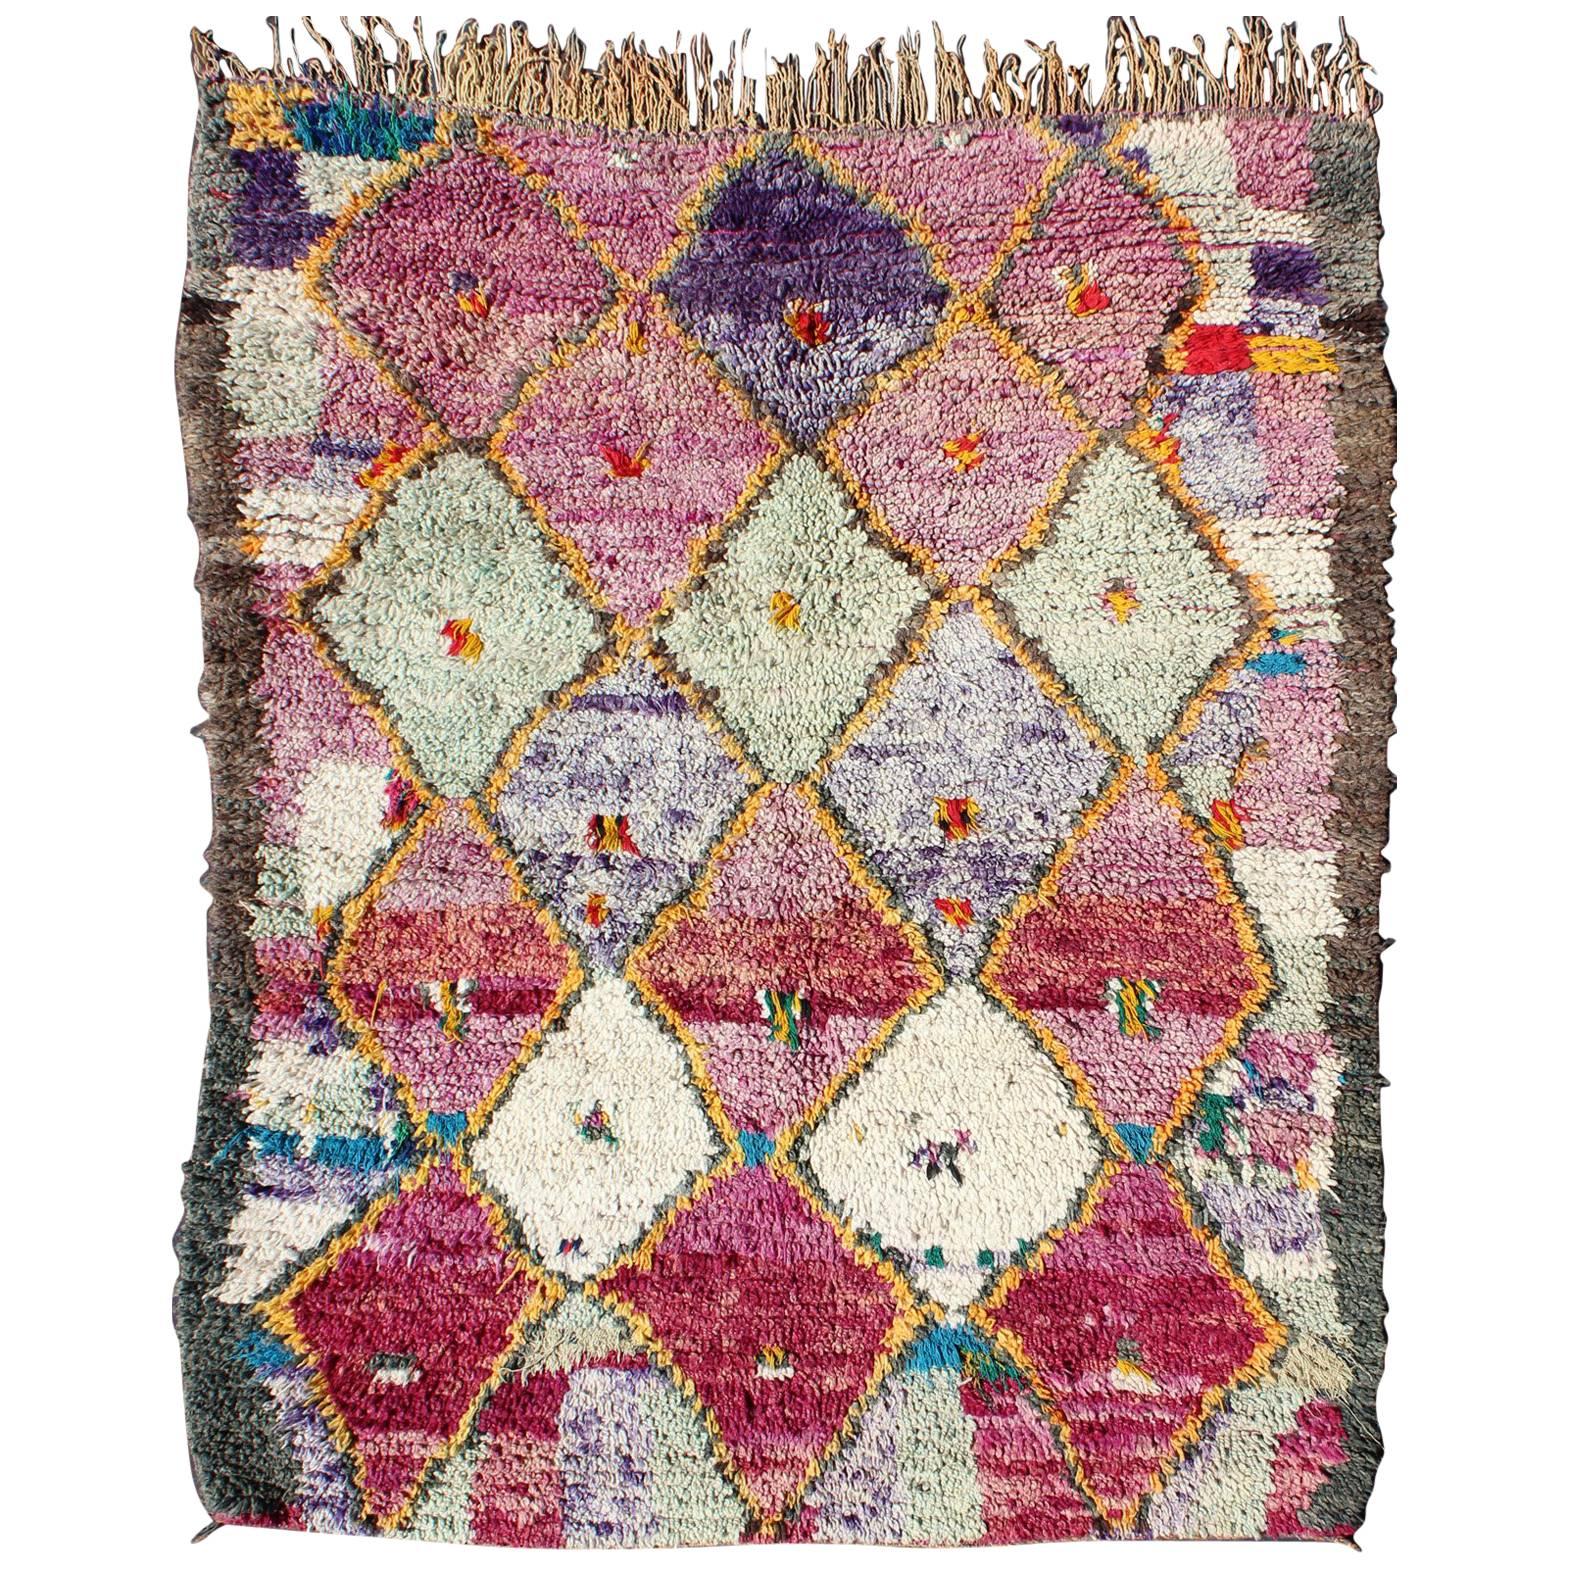 Colorful Vintage Moroccan Rug with Pink, Yellow, Turquoise, Ivory, Gray Diamonds